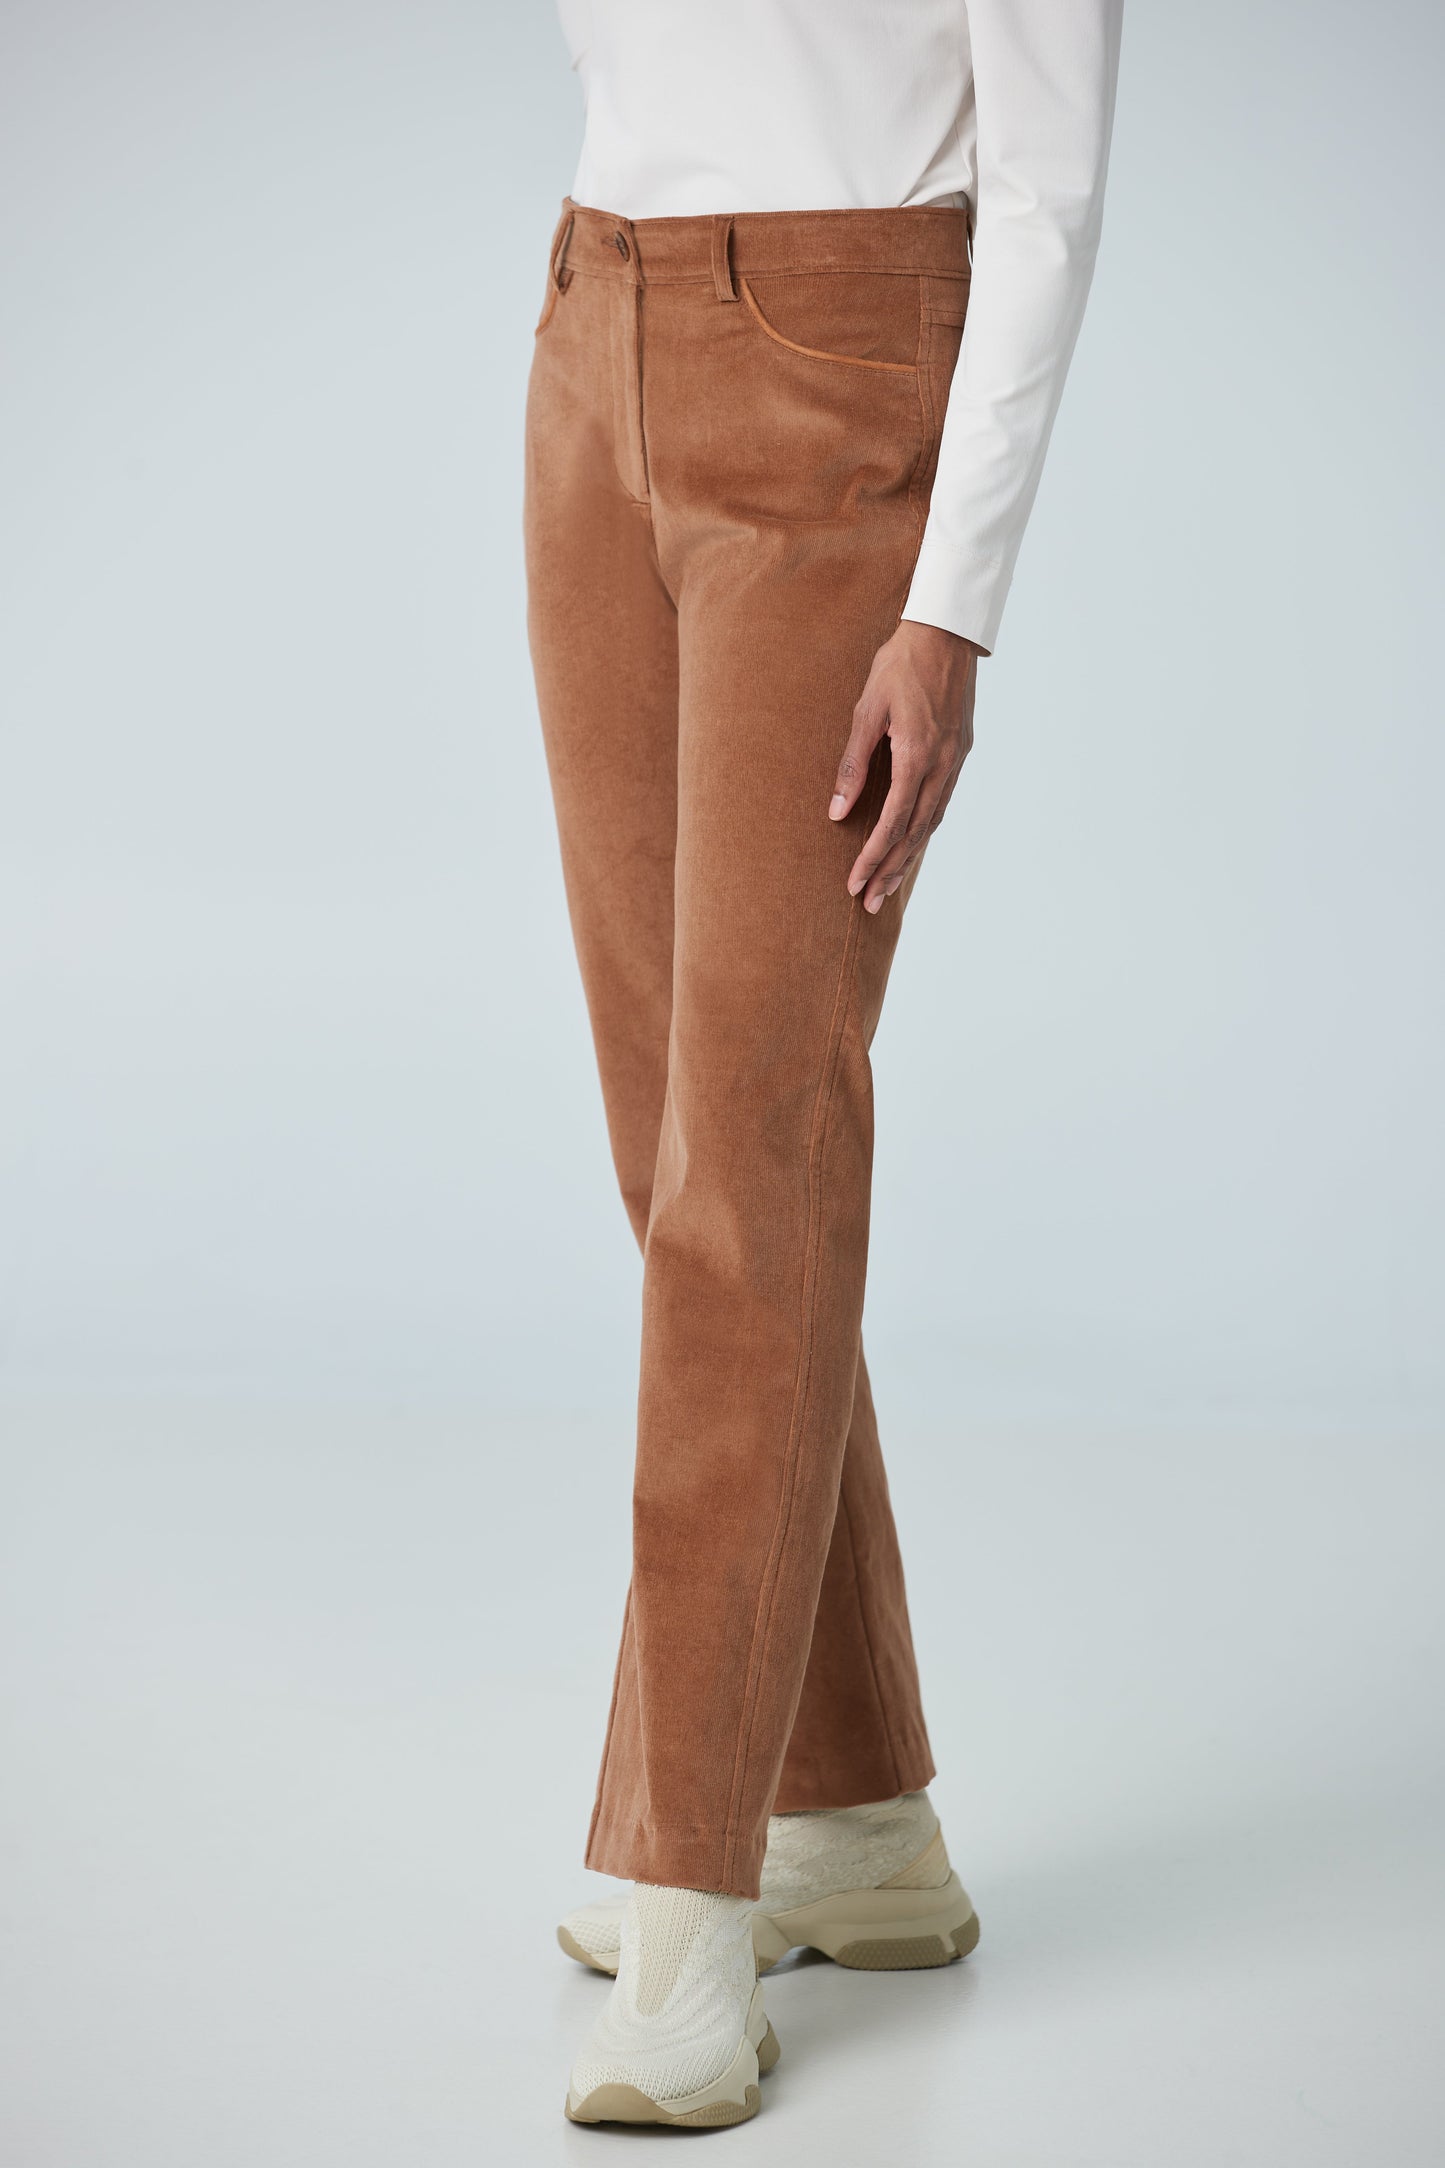 Straight leg crop pant with faux leather insert